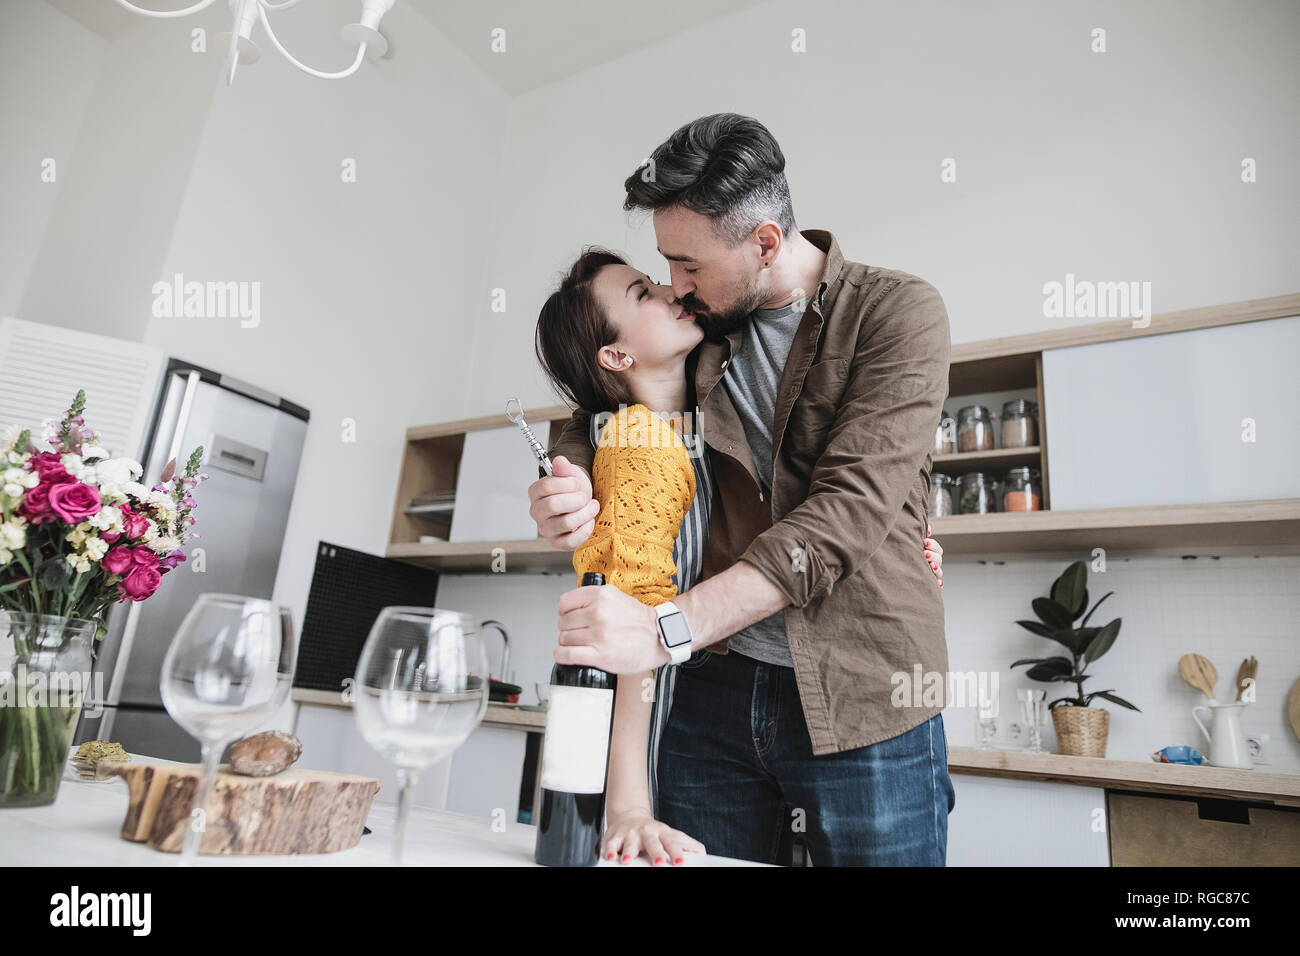 Couple in love kissing in the kitchen Stock Photo